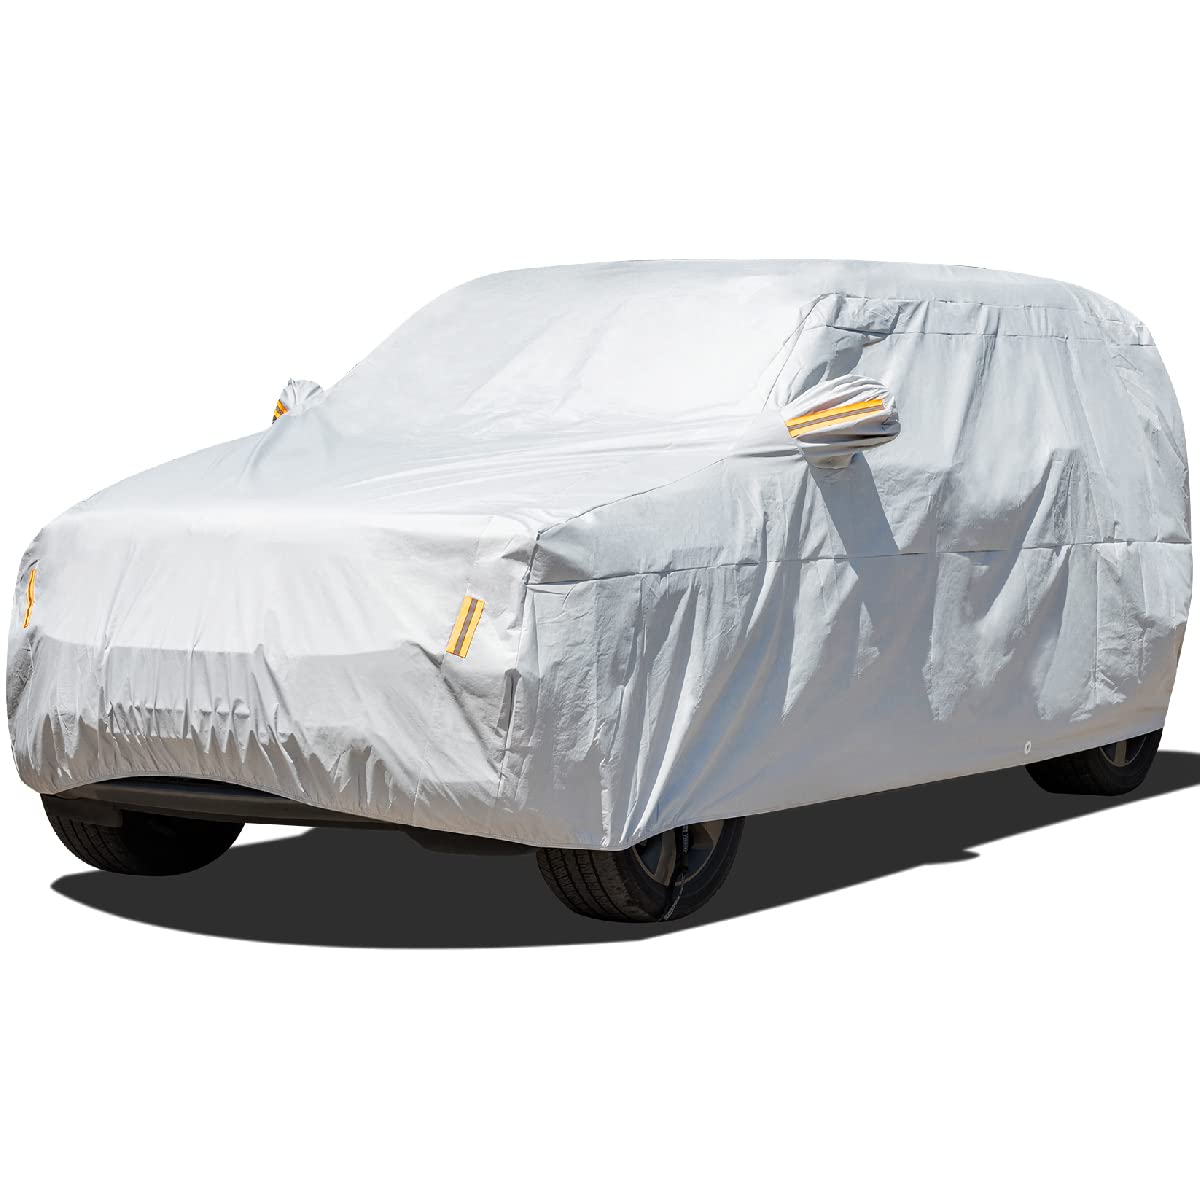 Tecoom car cover Waterproof All Weather for Automobiles, Tecoom Full car Hail Protector with Hot Pressing Process, Fleece Lined and Loc